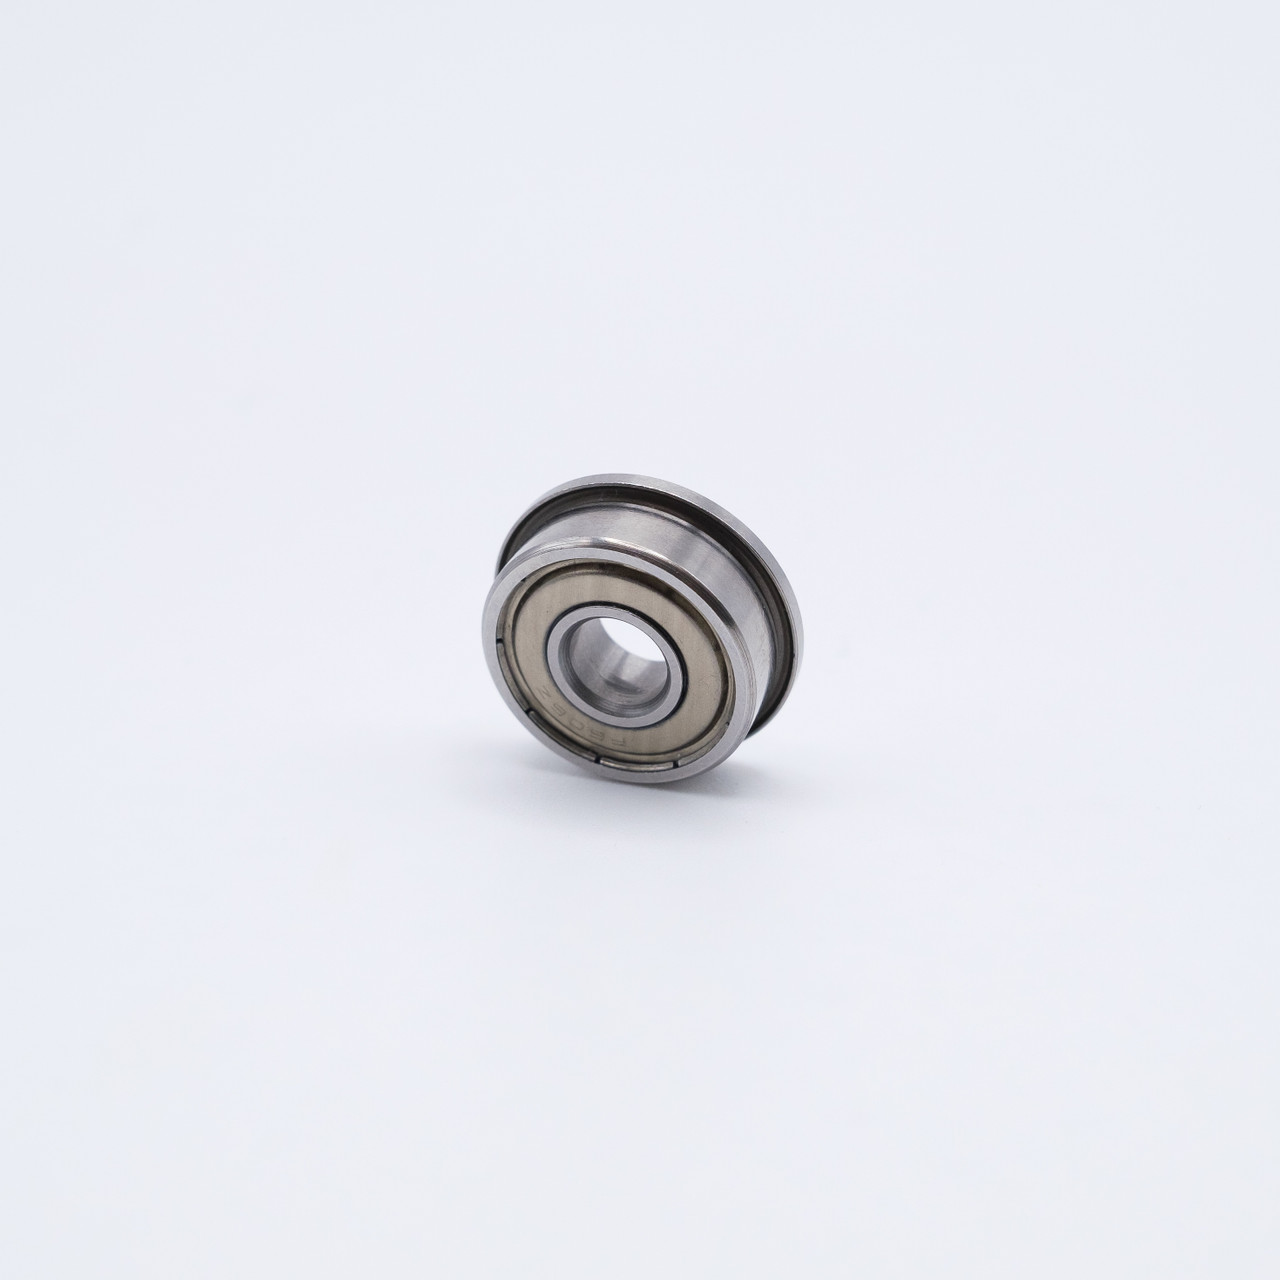 SF685-ZZ Stainless Steel Flange Miniature Ball Bearing 5x11x5mm Front View